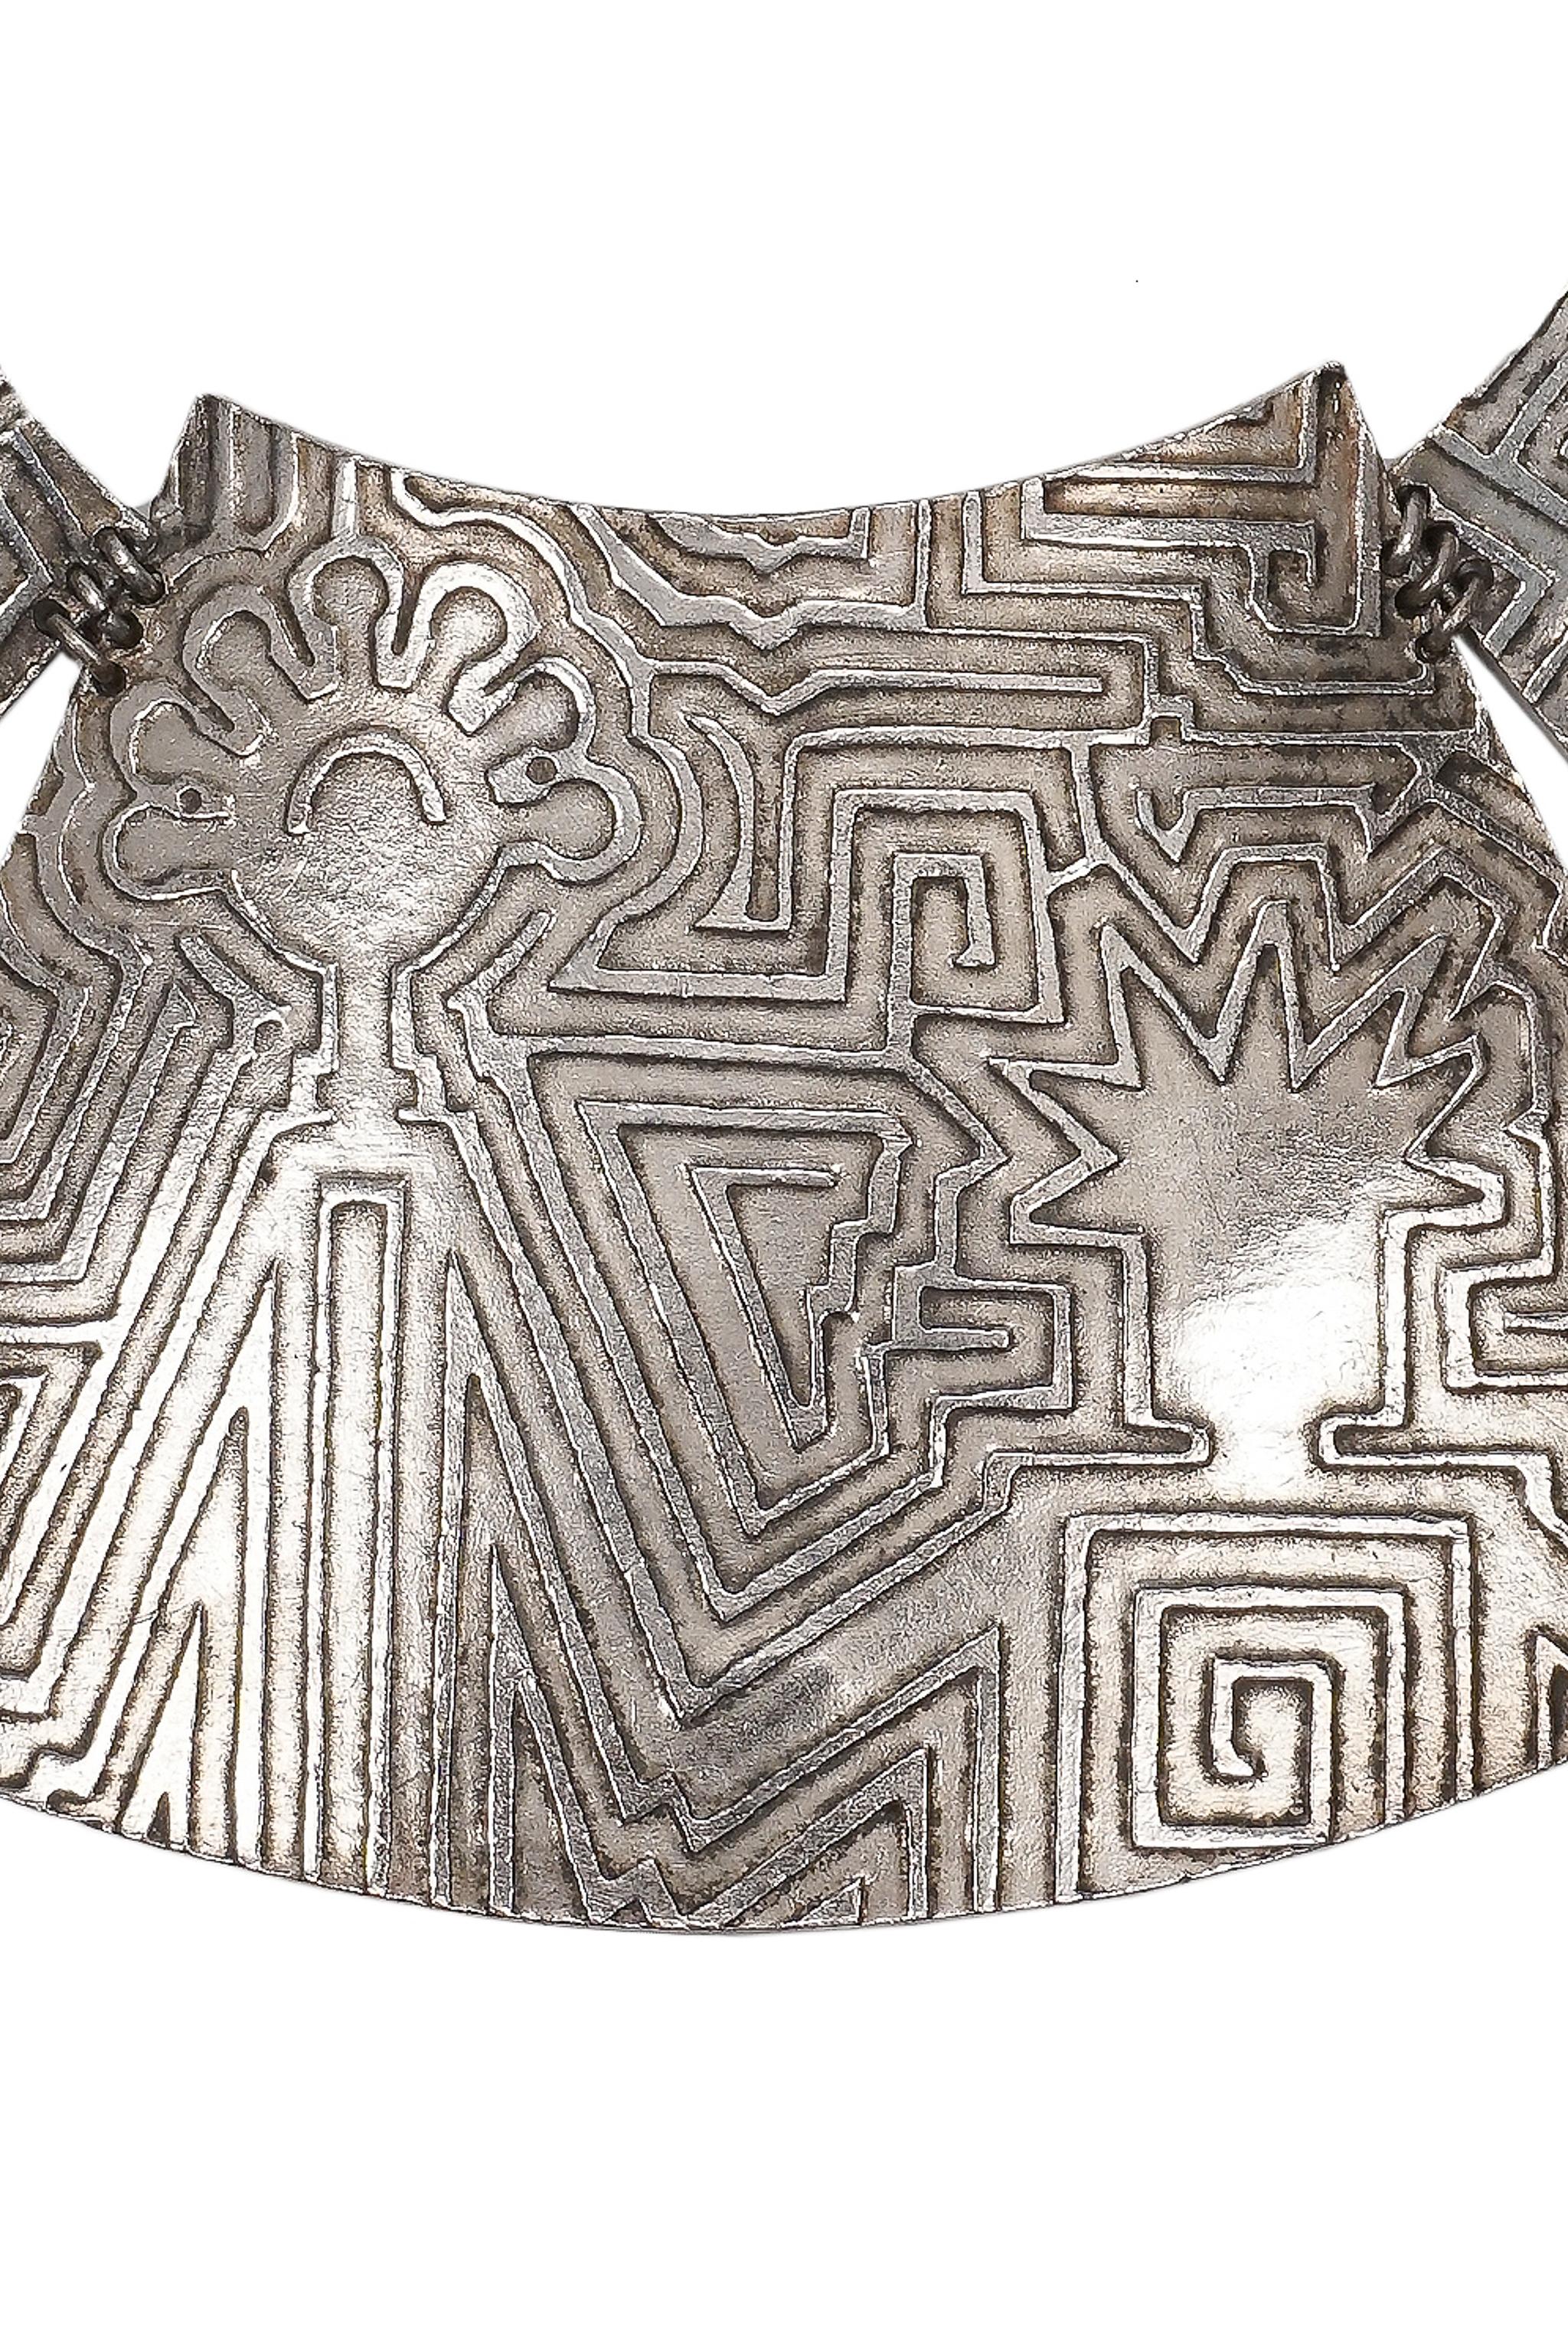 Resurrection Vintage is excited to offer a vintage Biche de Bere hammered silver-tone armor necklace featuring graphic etchings & toggle closure.

Biche de Bere
Measurements: Circumference 14